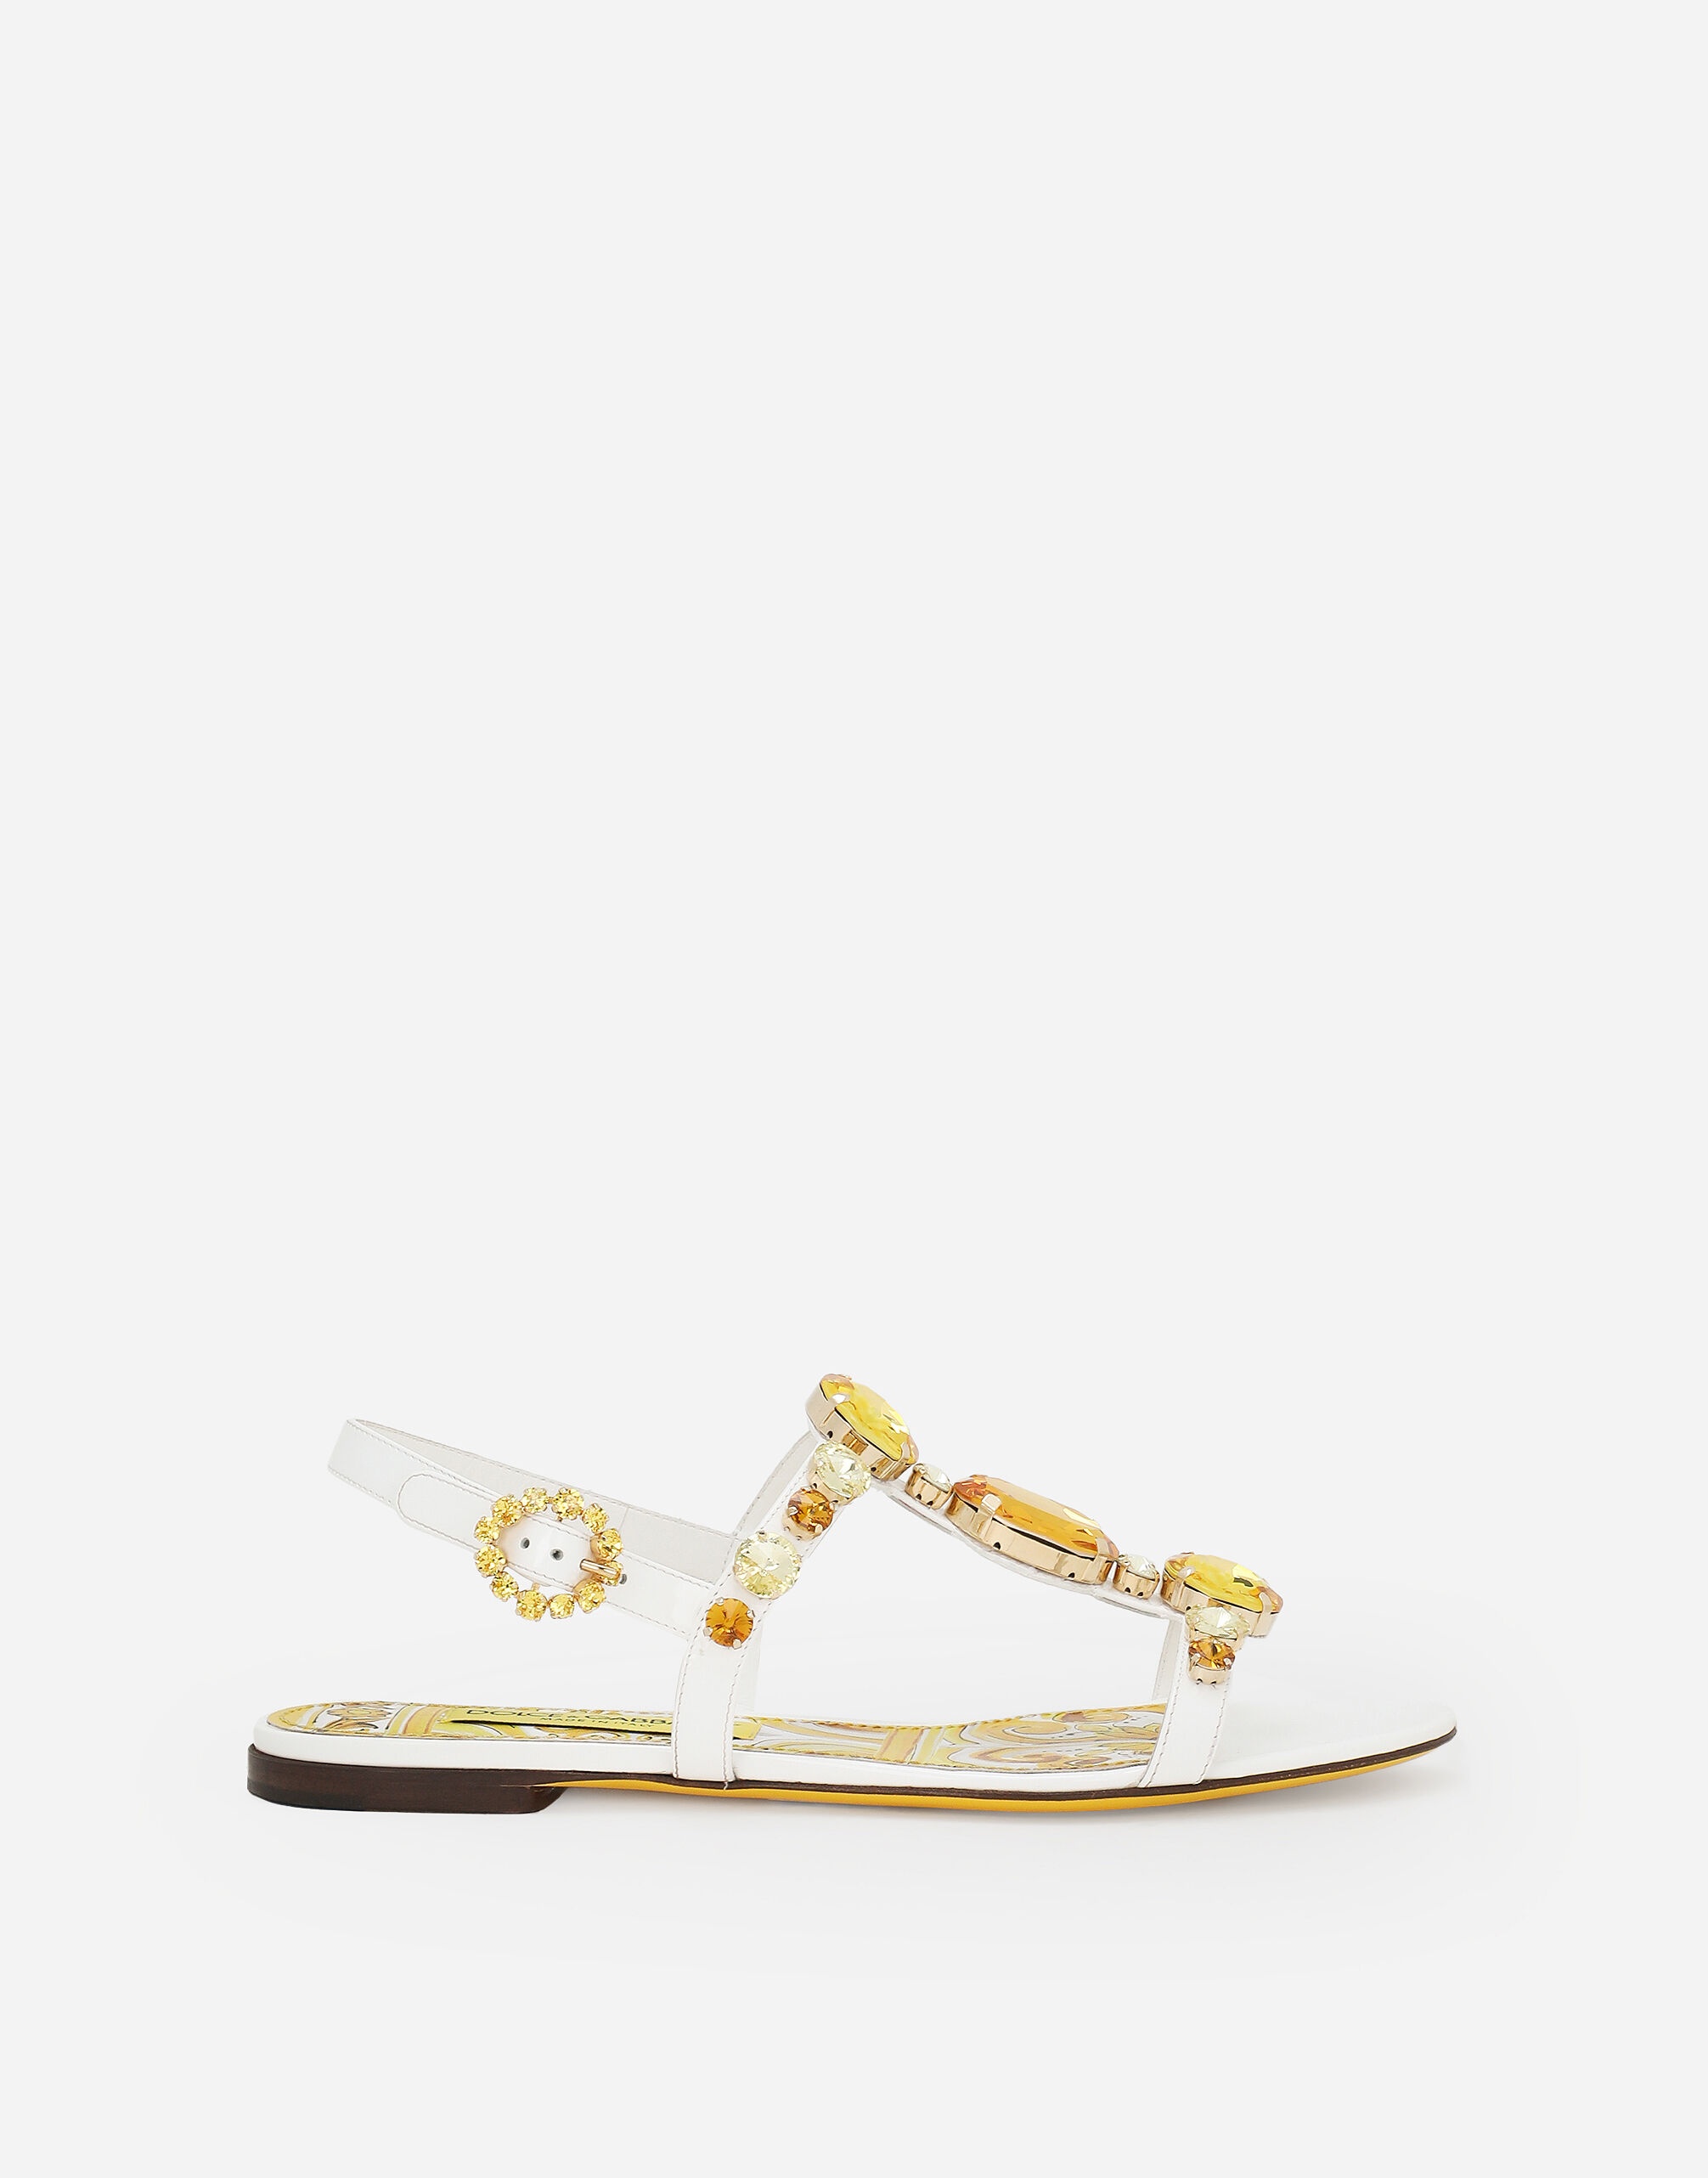 Patent leather sandals with stone embellishment - 1